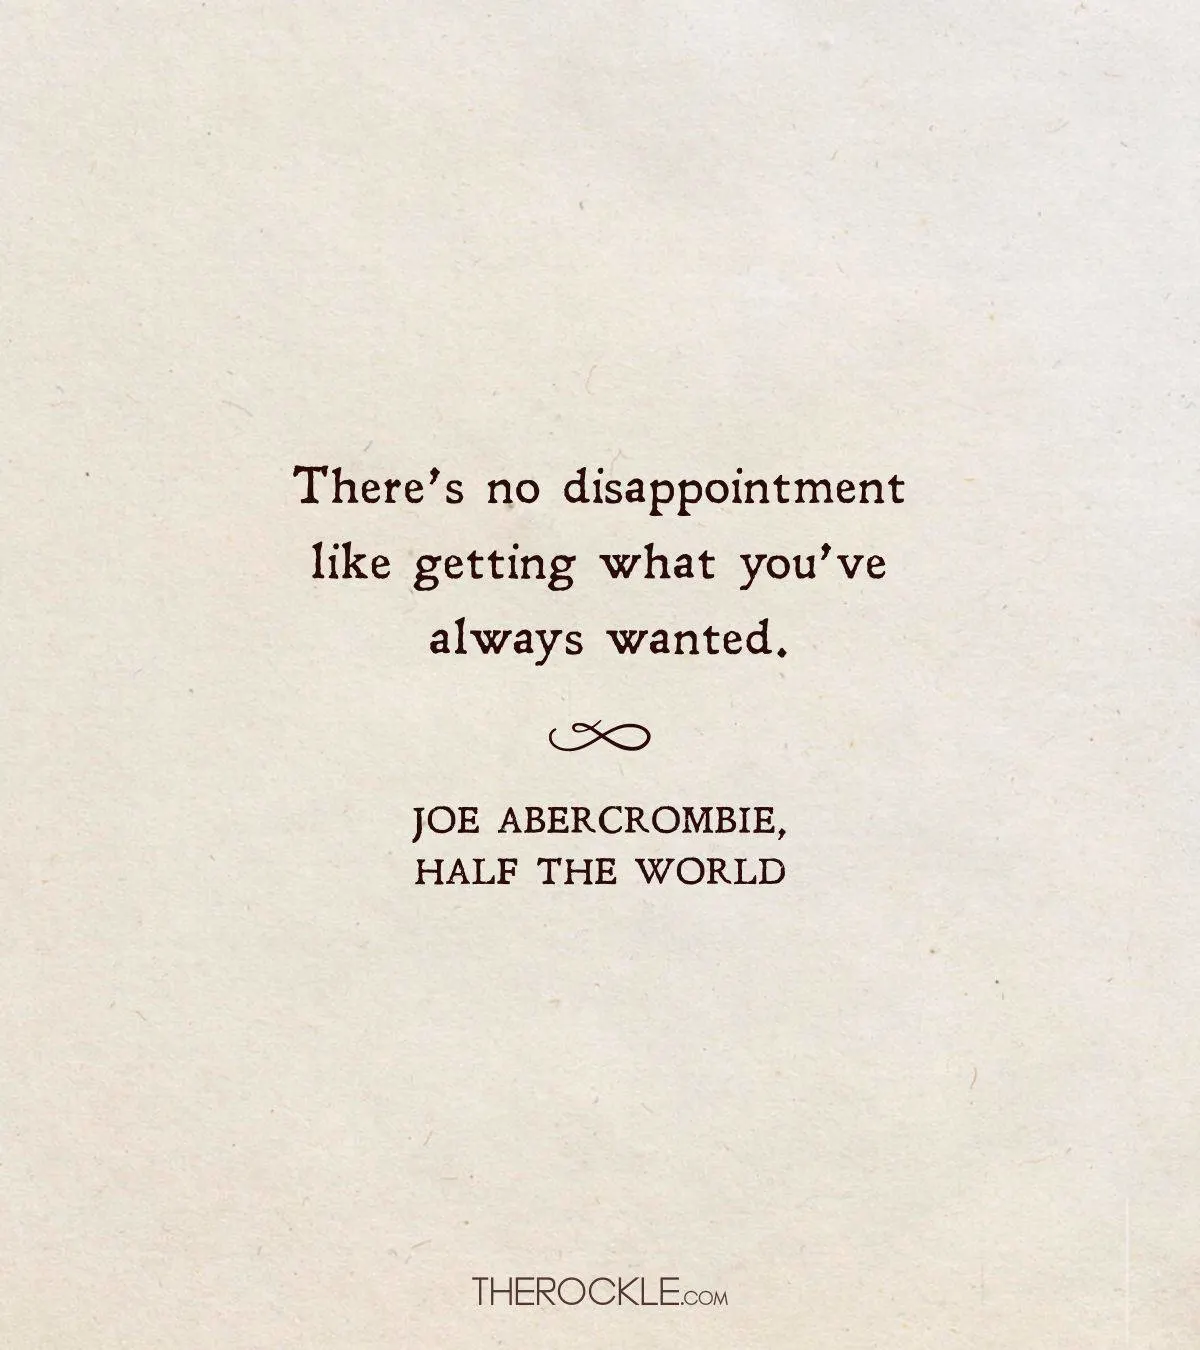 funny take on disappointment by Joe Abercrombie 